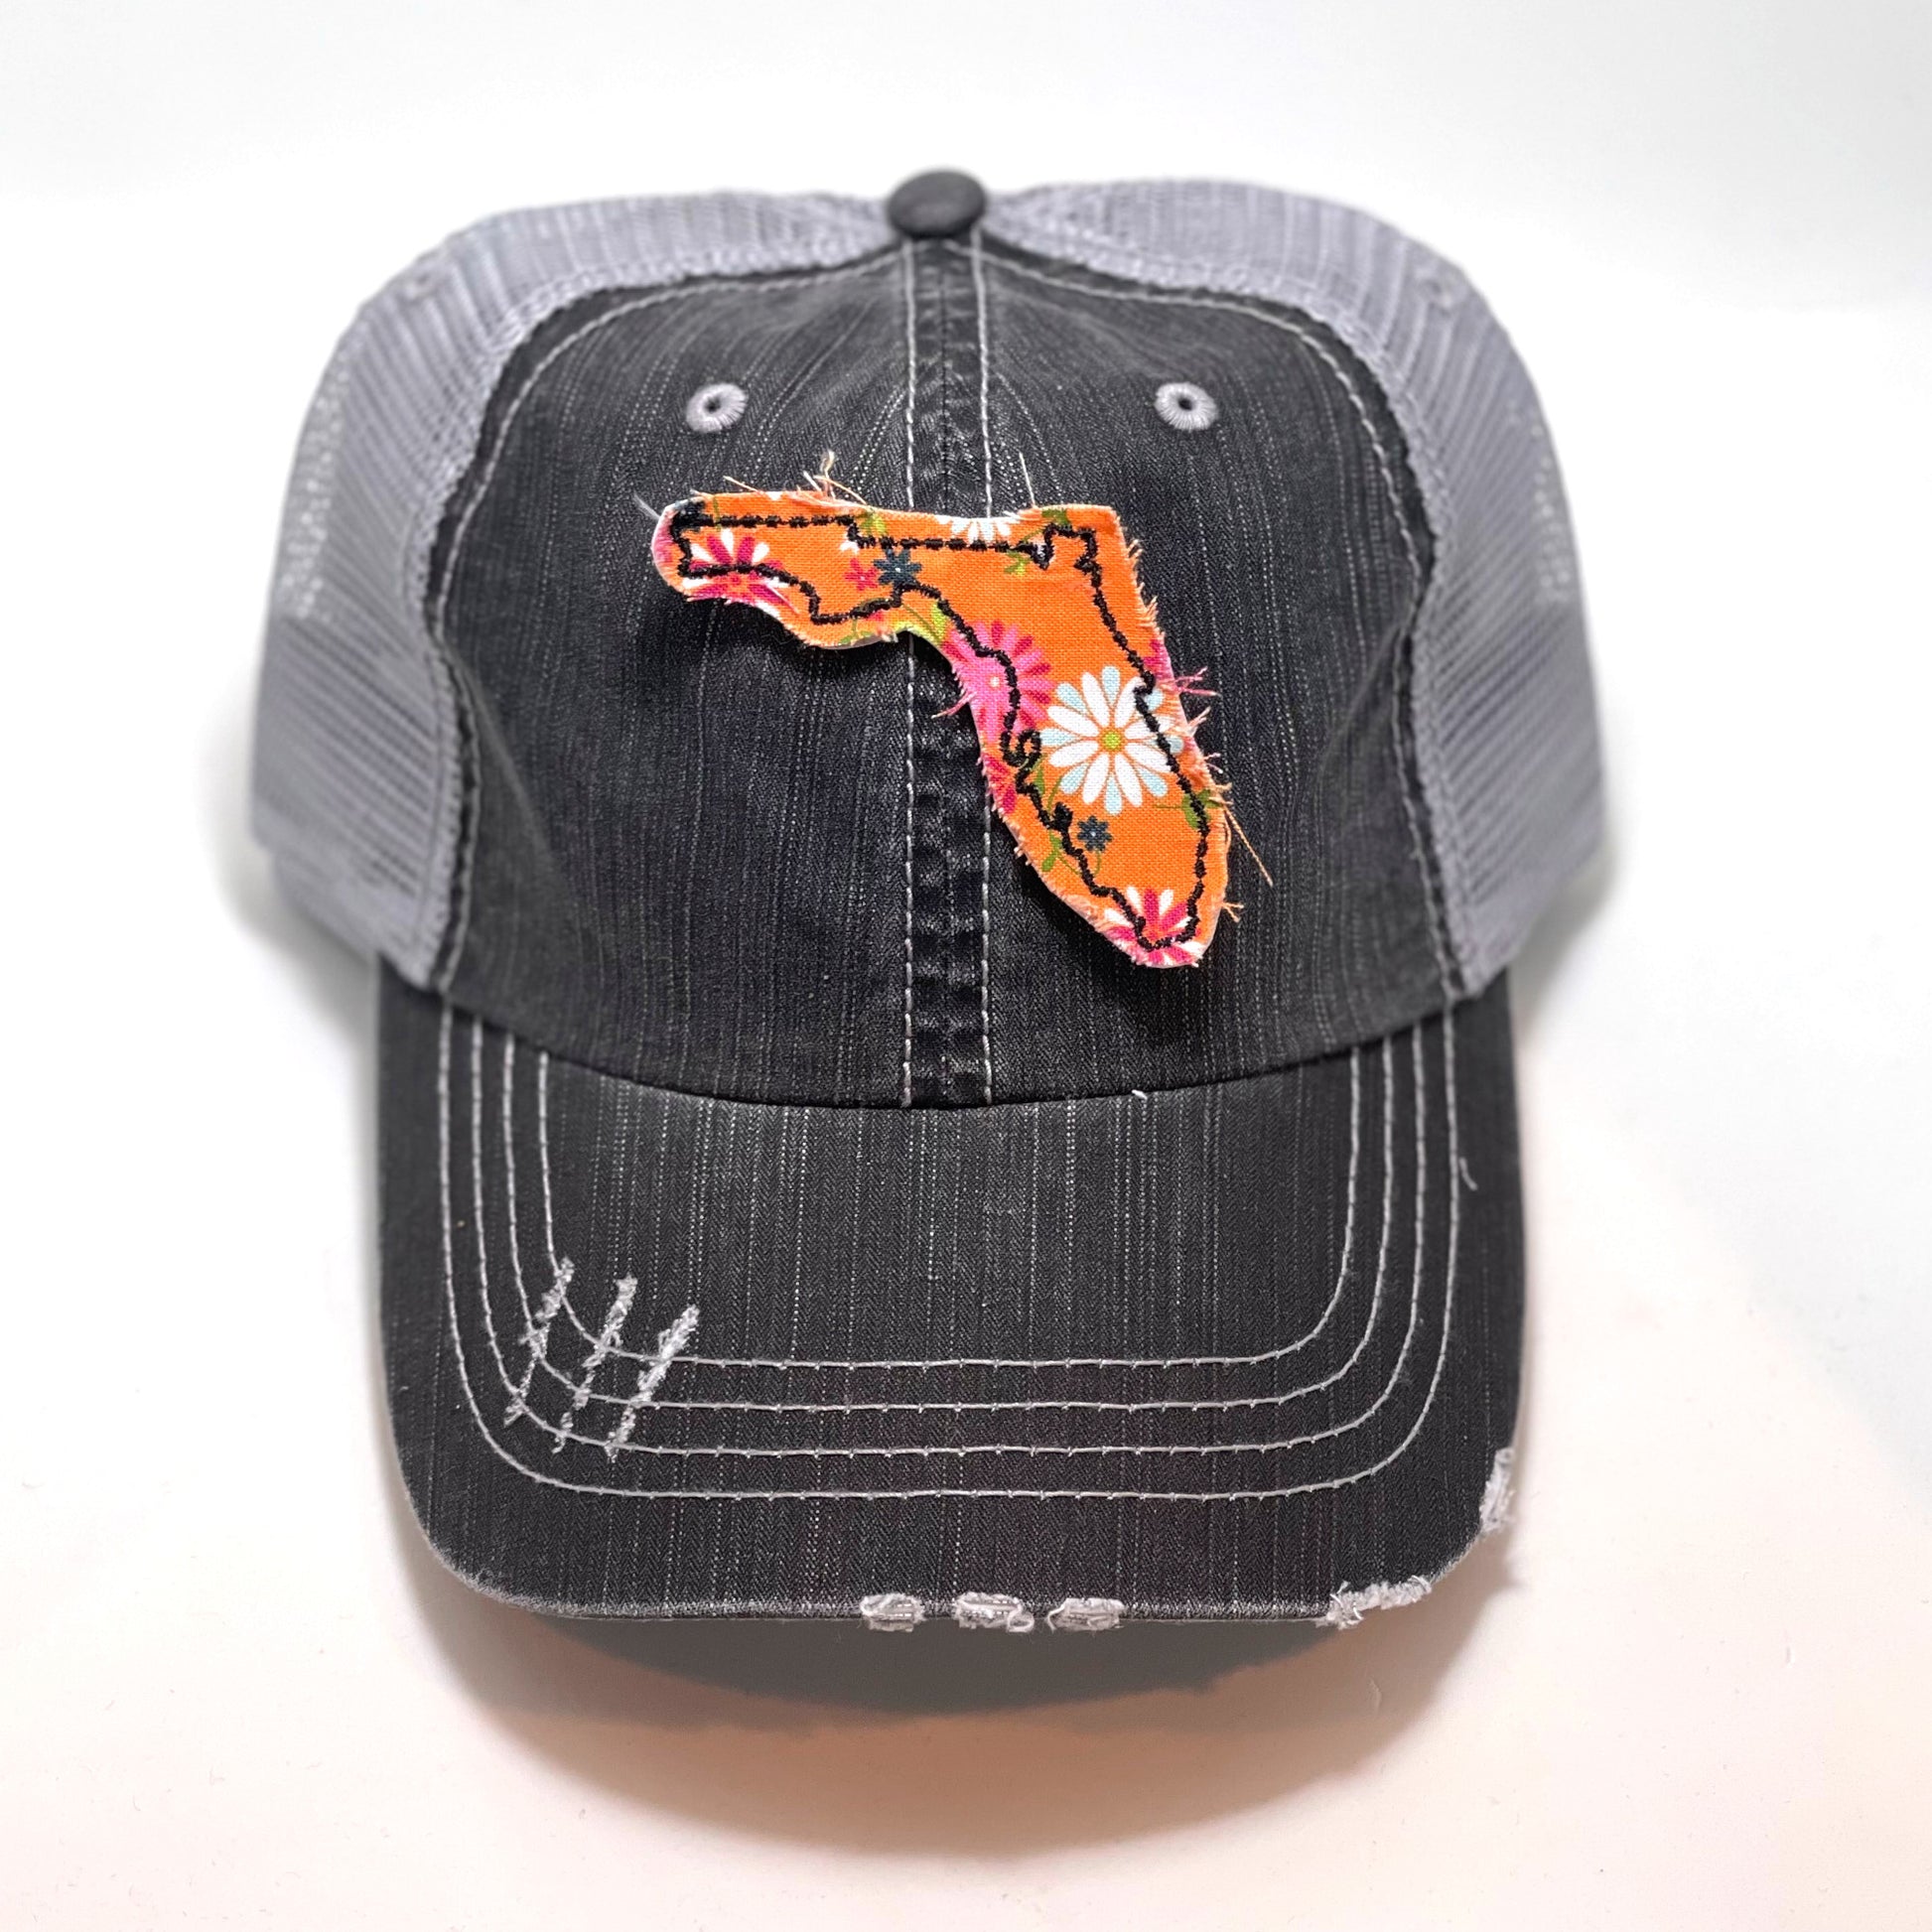 gray distressed trucker hat with gray floral fabric state of Florida